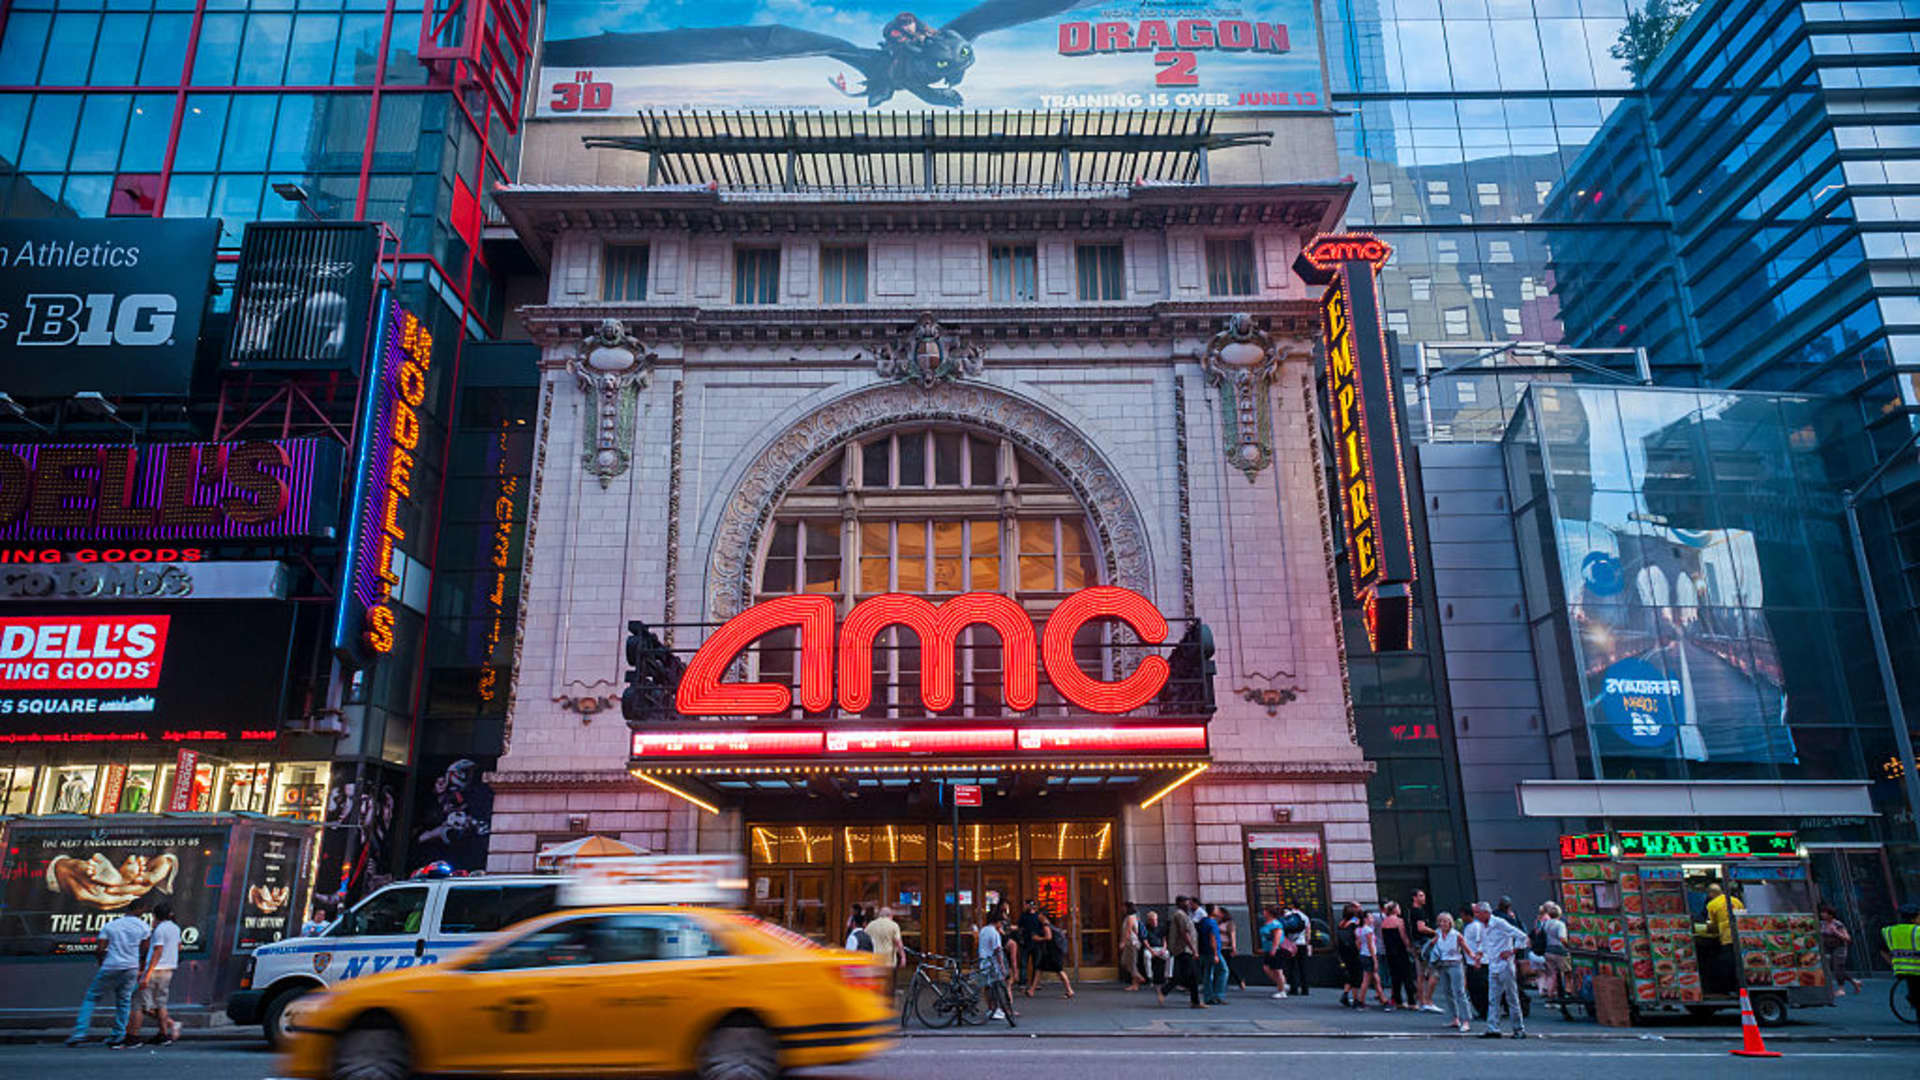 amc-plans-to-issue-517-million-shares-of-preferred-stock,-under-the-ticker-symbol-‘ape’